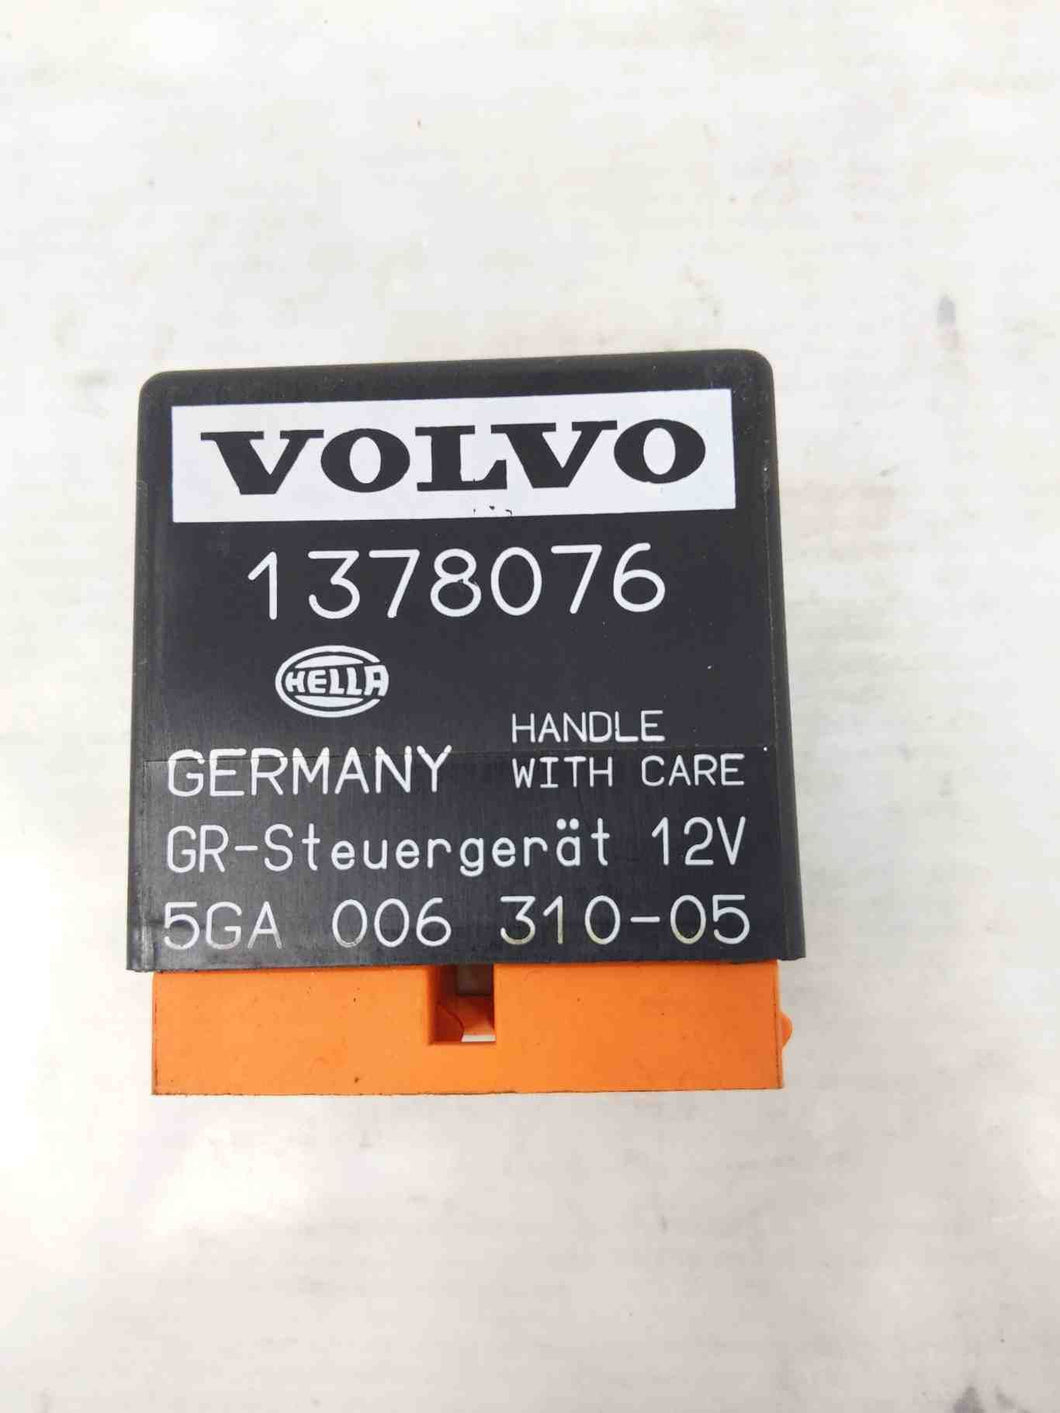 CRUISE CONTROL COMPUTER Volvo S70 850 960 93 94 - 97 98 - NW38957